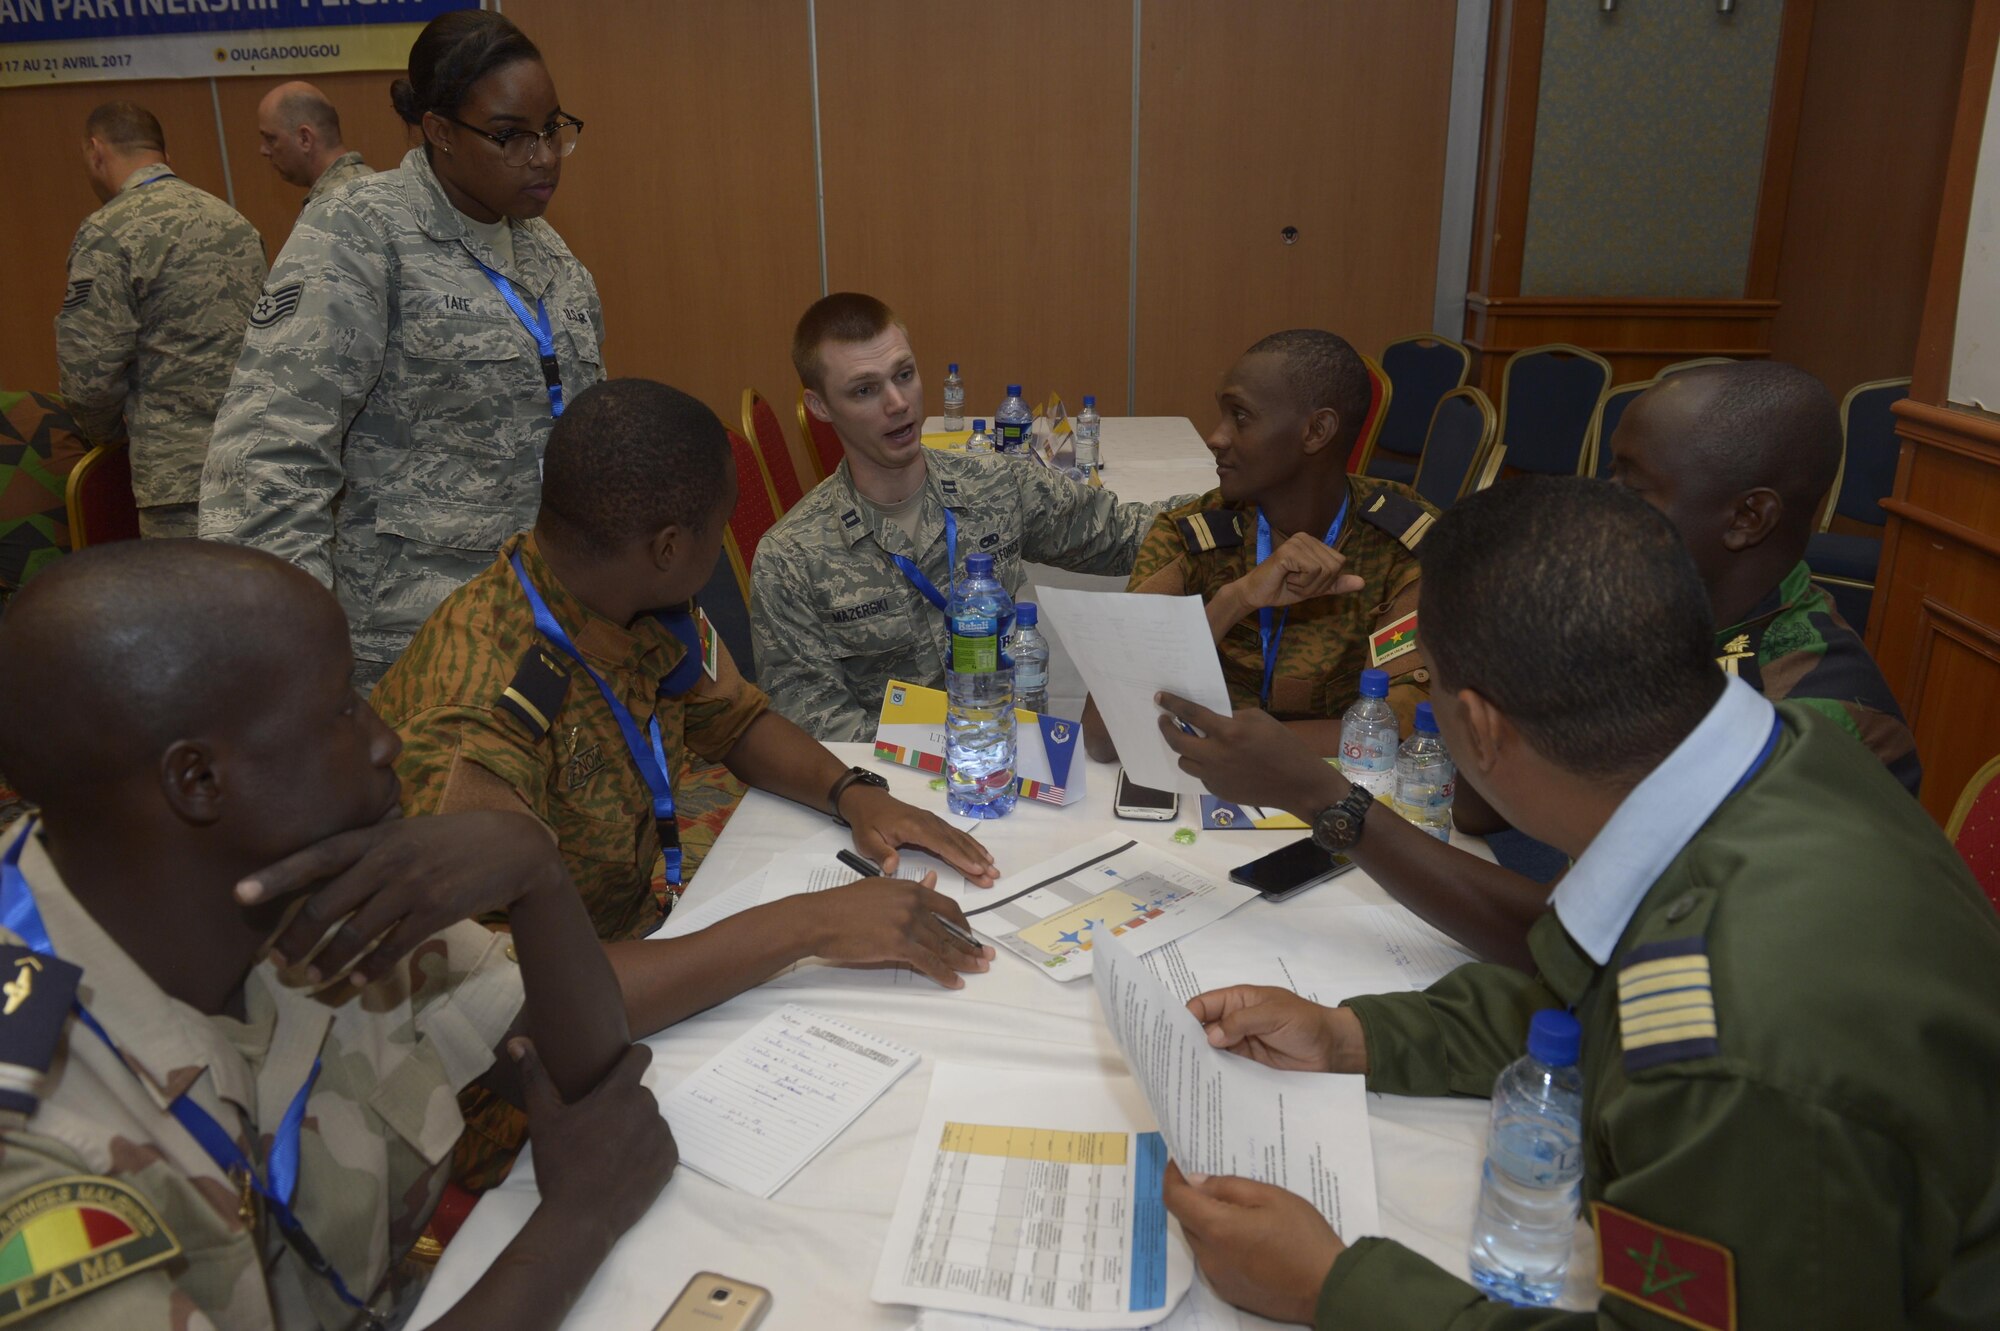 U.S. Air Force Capt. Ian Mazerski, 321st Contingency Response Squadron maintenance flight commander, talks with African Partnership Flight participants during a table top workshop in Ouagadougou, Burkina Faso, April 20, 2017. The intent of APF is to build strong transparent partnerships that enhance regional stability and security through formal alliances, partnerships and simple exchanges of information. (U.S. Air Force photo by Staff Sgt. Jonathan Snyder)